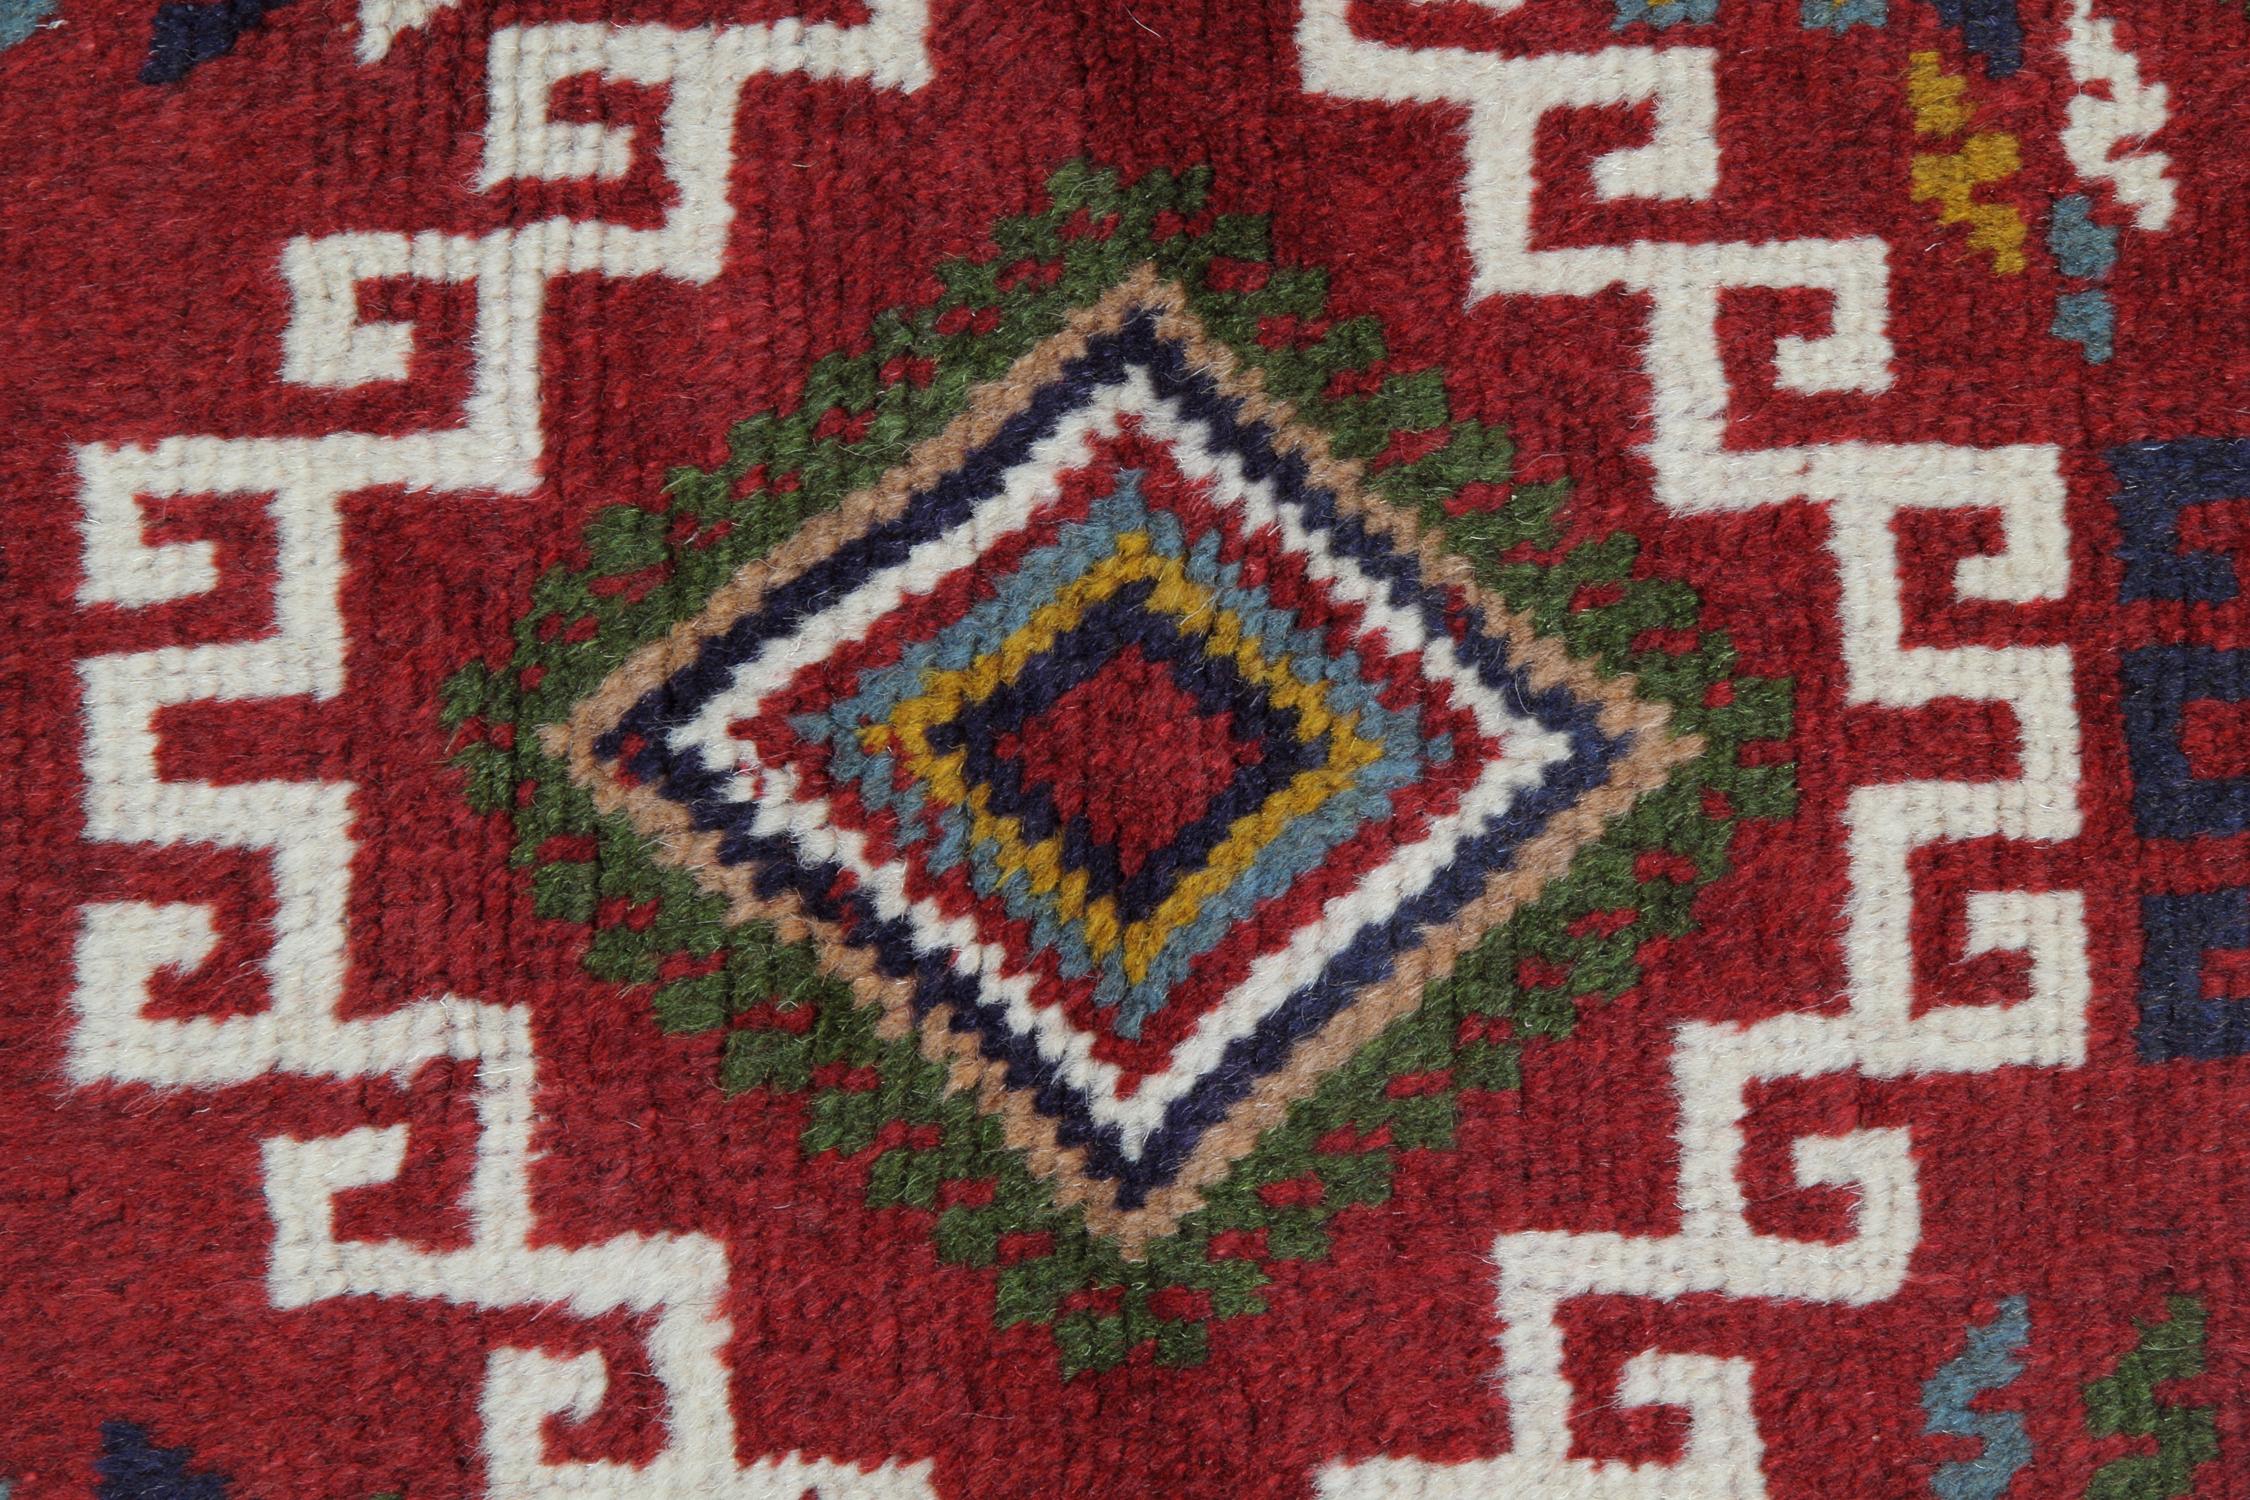 Green, blue, white and grey make up the main accent colours of the medallions, woven on a rich red background with a decorative surrounding design and repeat pattern border. This elegant piece is sure to make the perfect accent rug in any home.